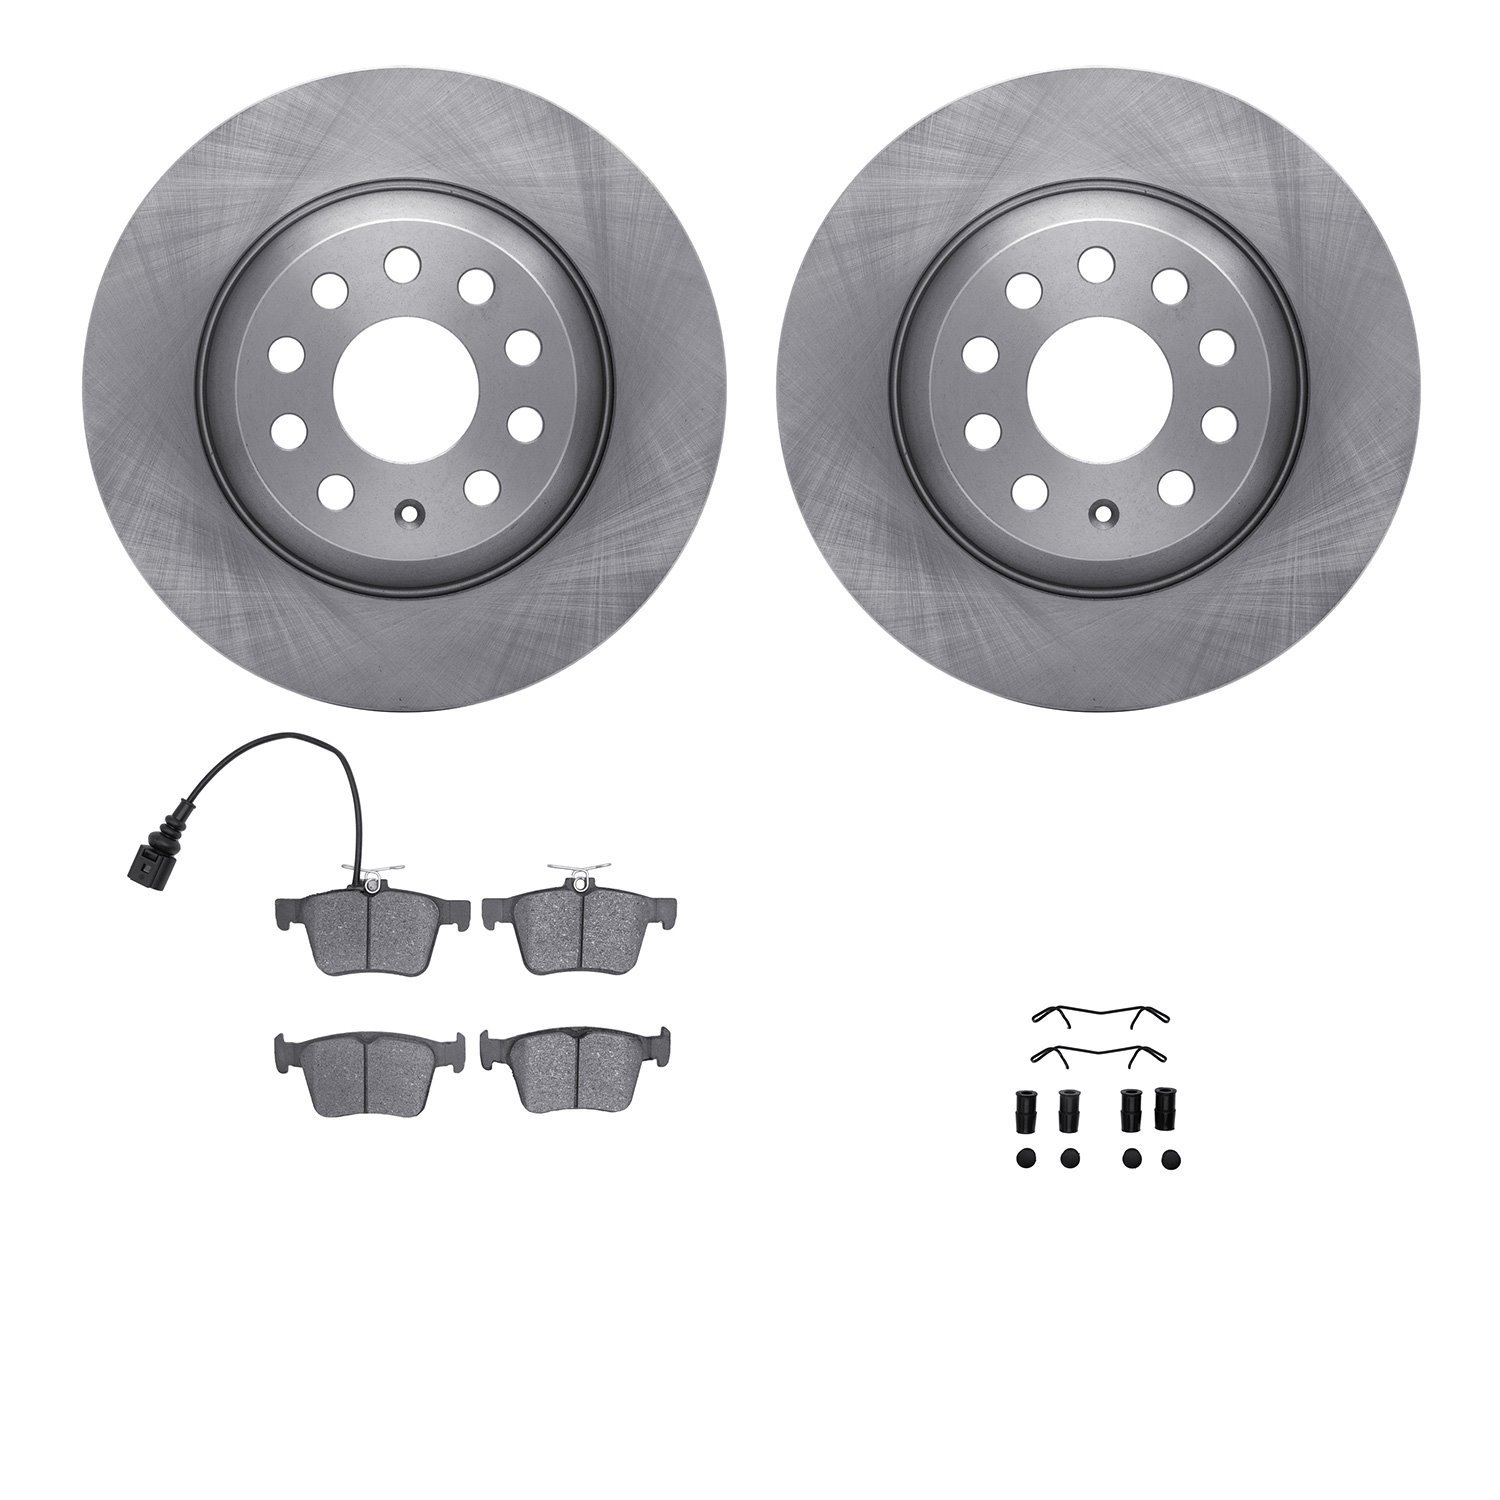 6312-73089 Brake Rotors with 3000-Series Ceramic Brake Pads Kit with Hardware, Fits Select Audi/Volkswagen, Position: Rear